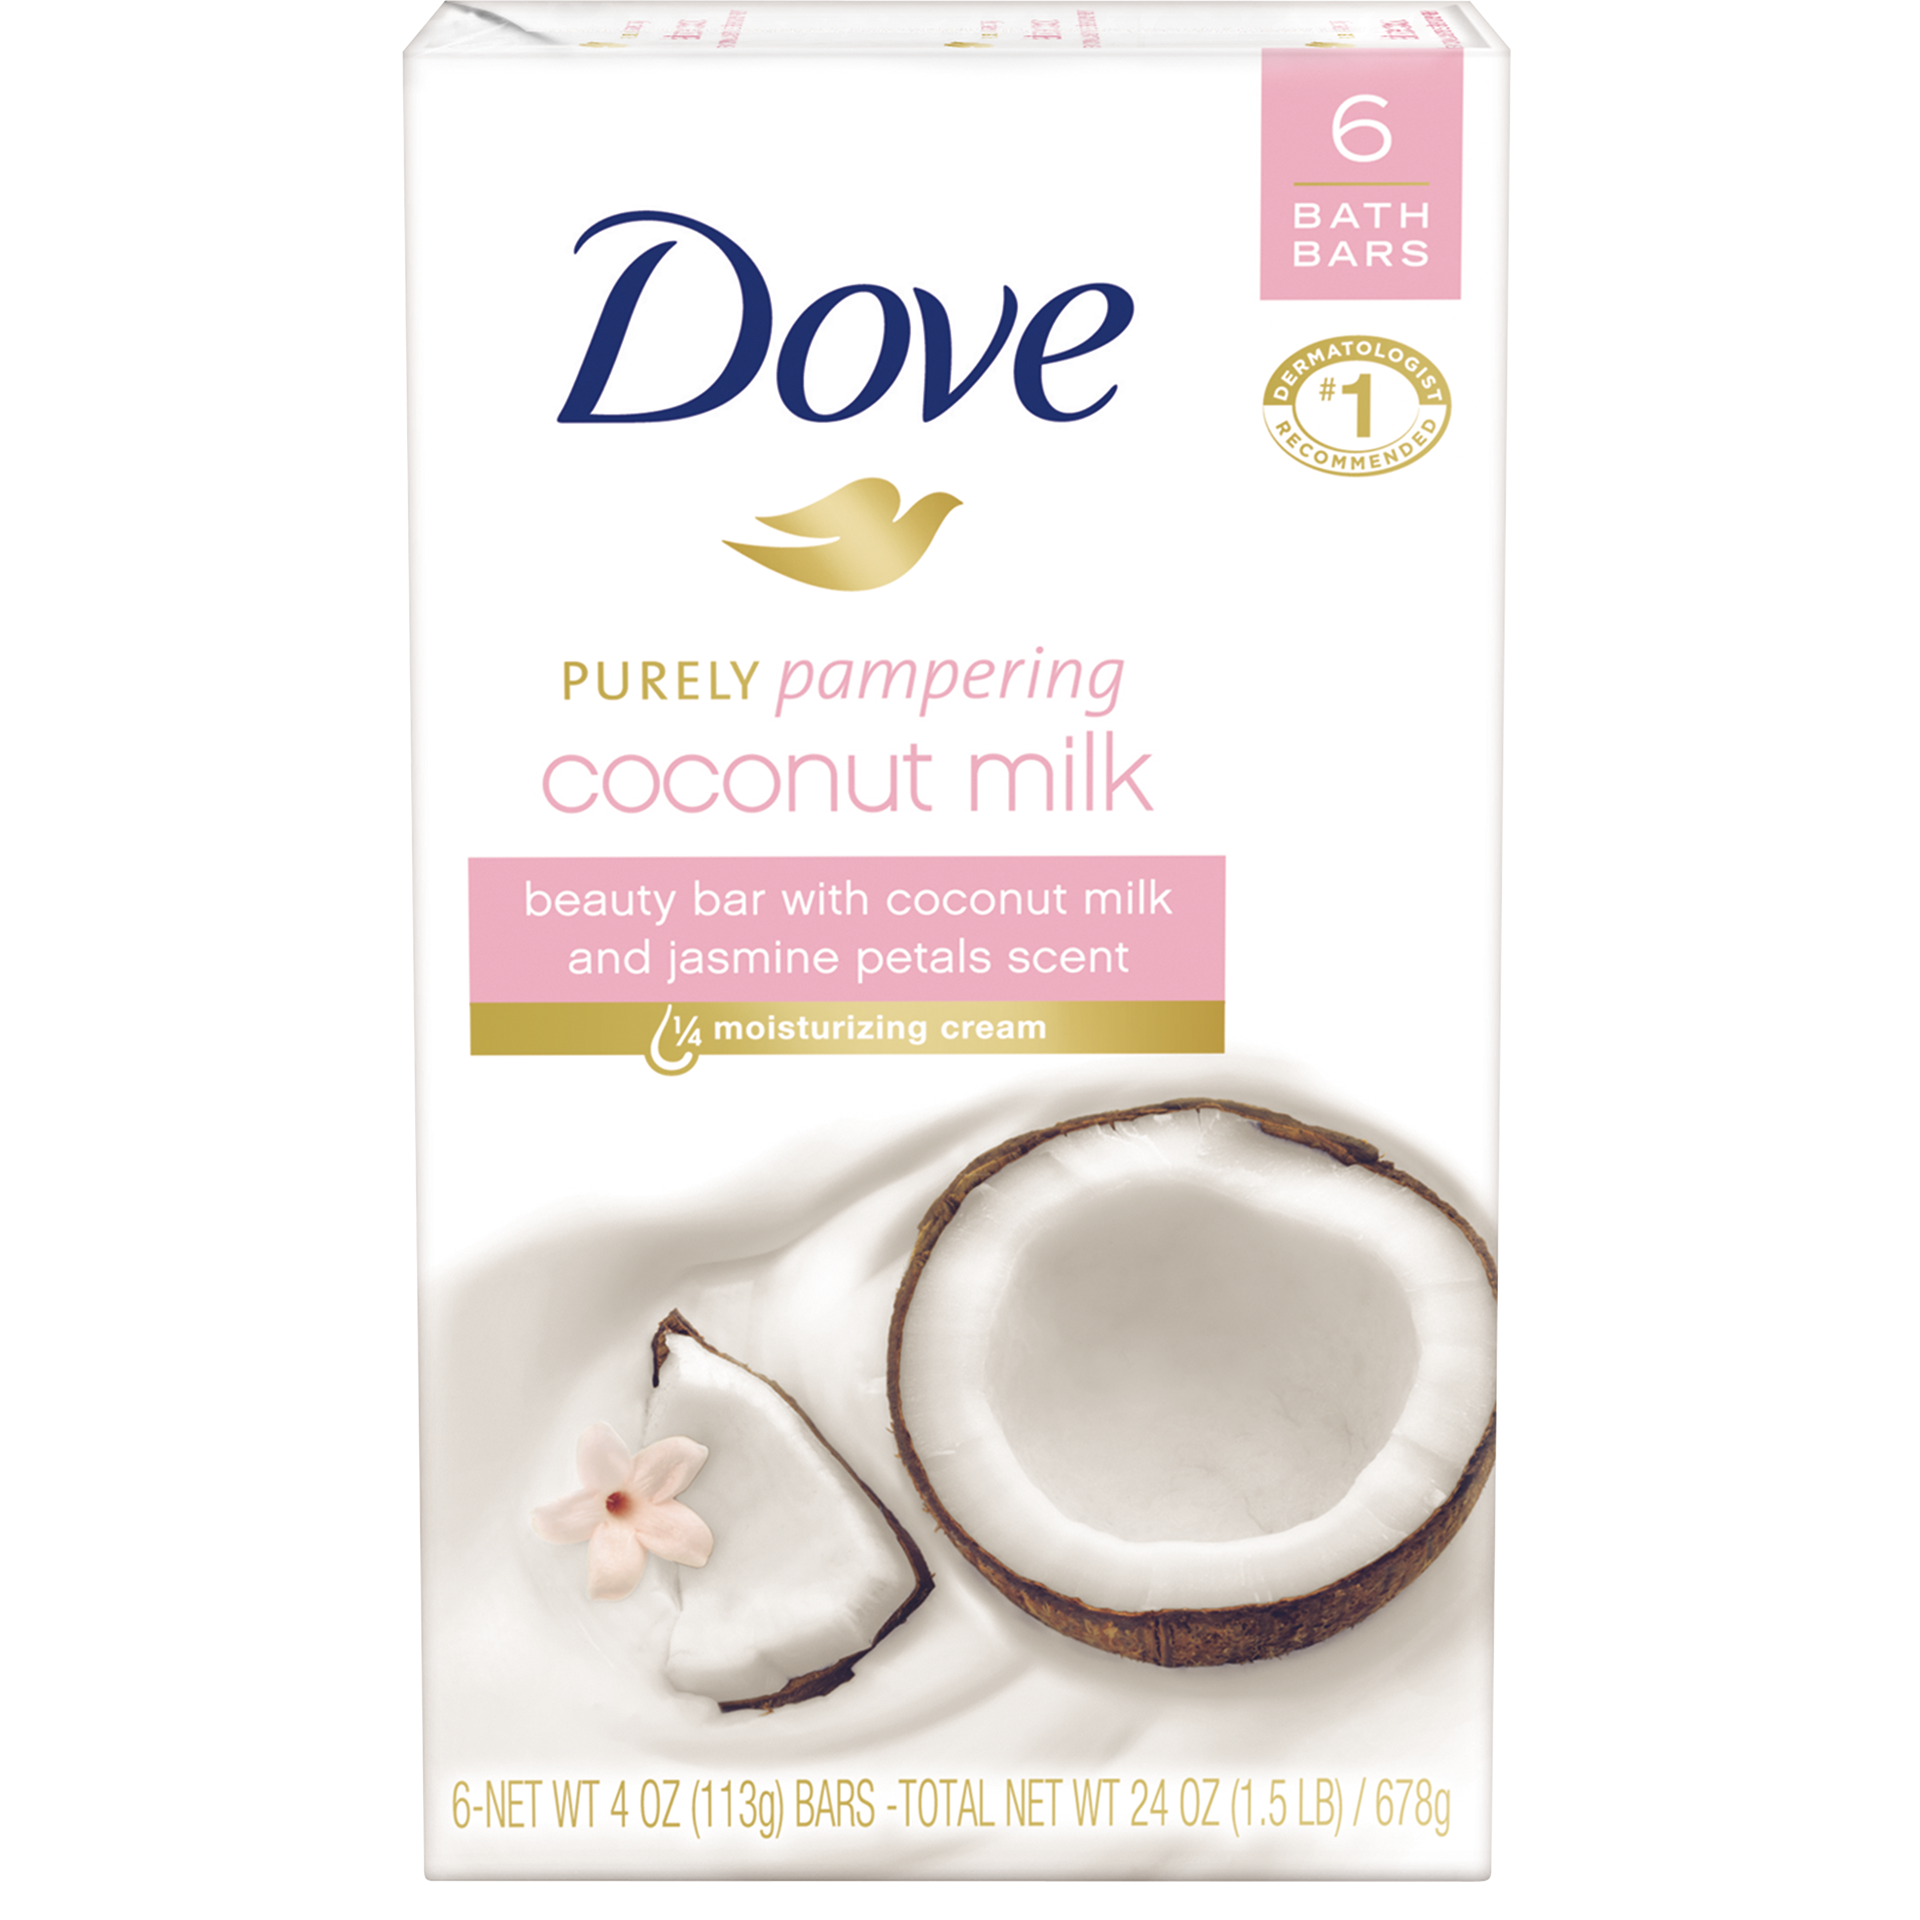 Dove Purely Pampering Coconut Milk Beauty Bar 6 bar 4 oz